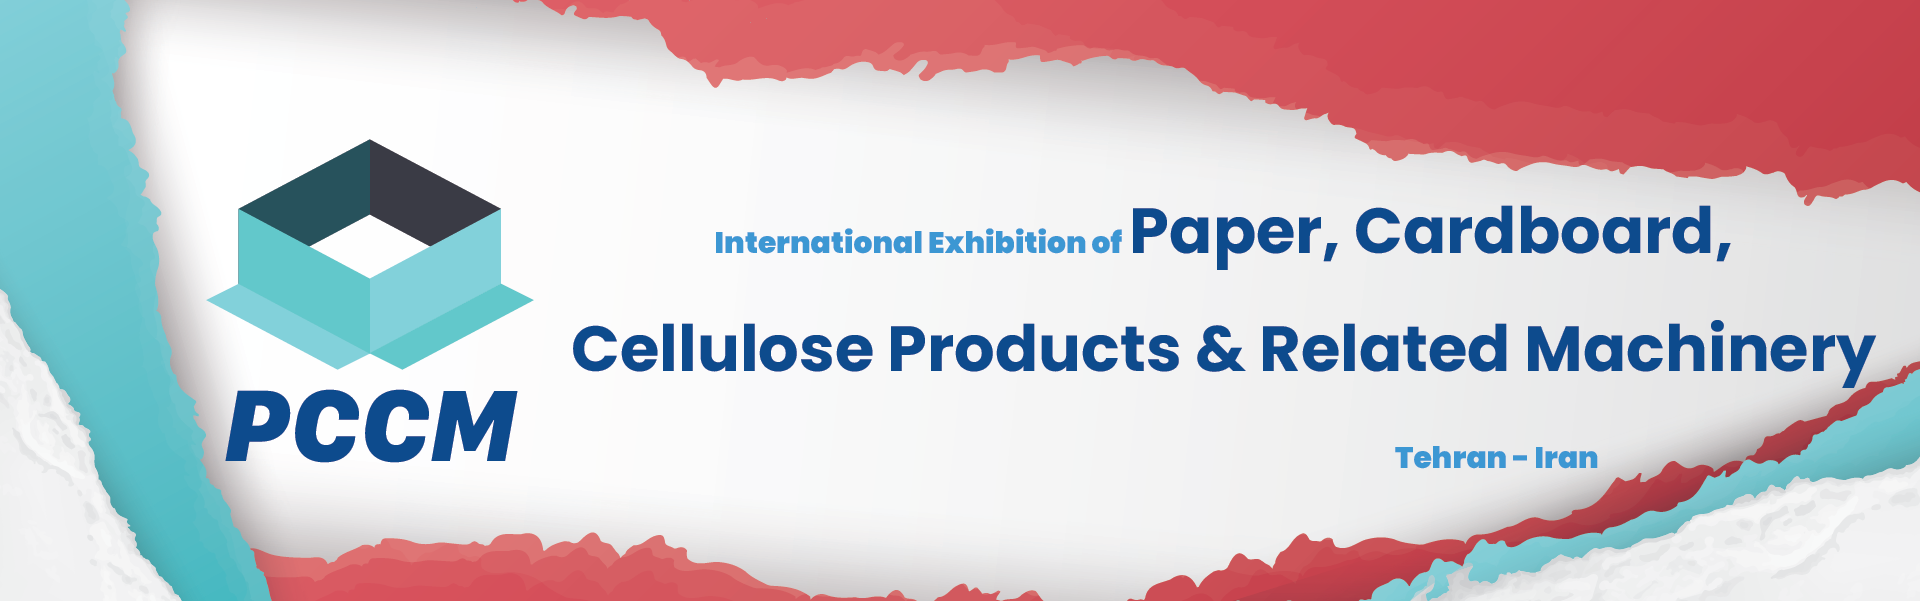 Paper Cardboard Cellulose Products and Related Machinery Exhibition Tehran